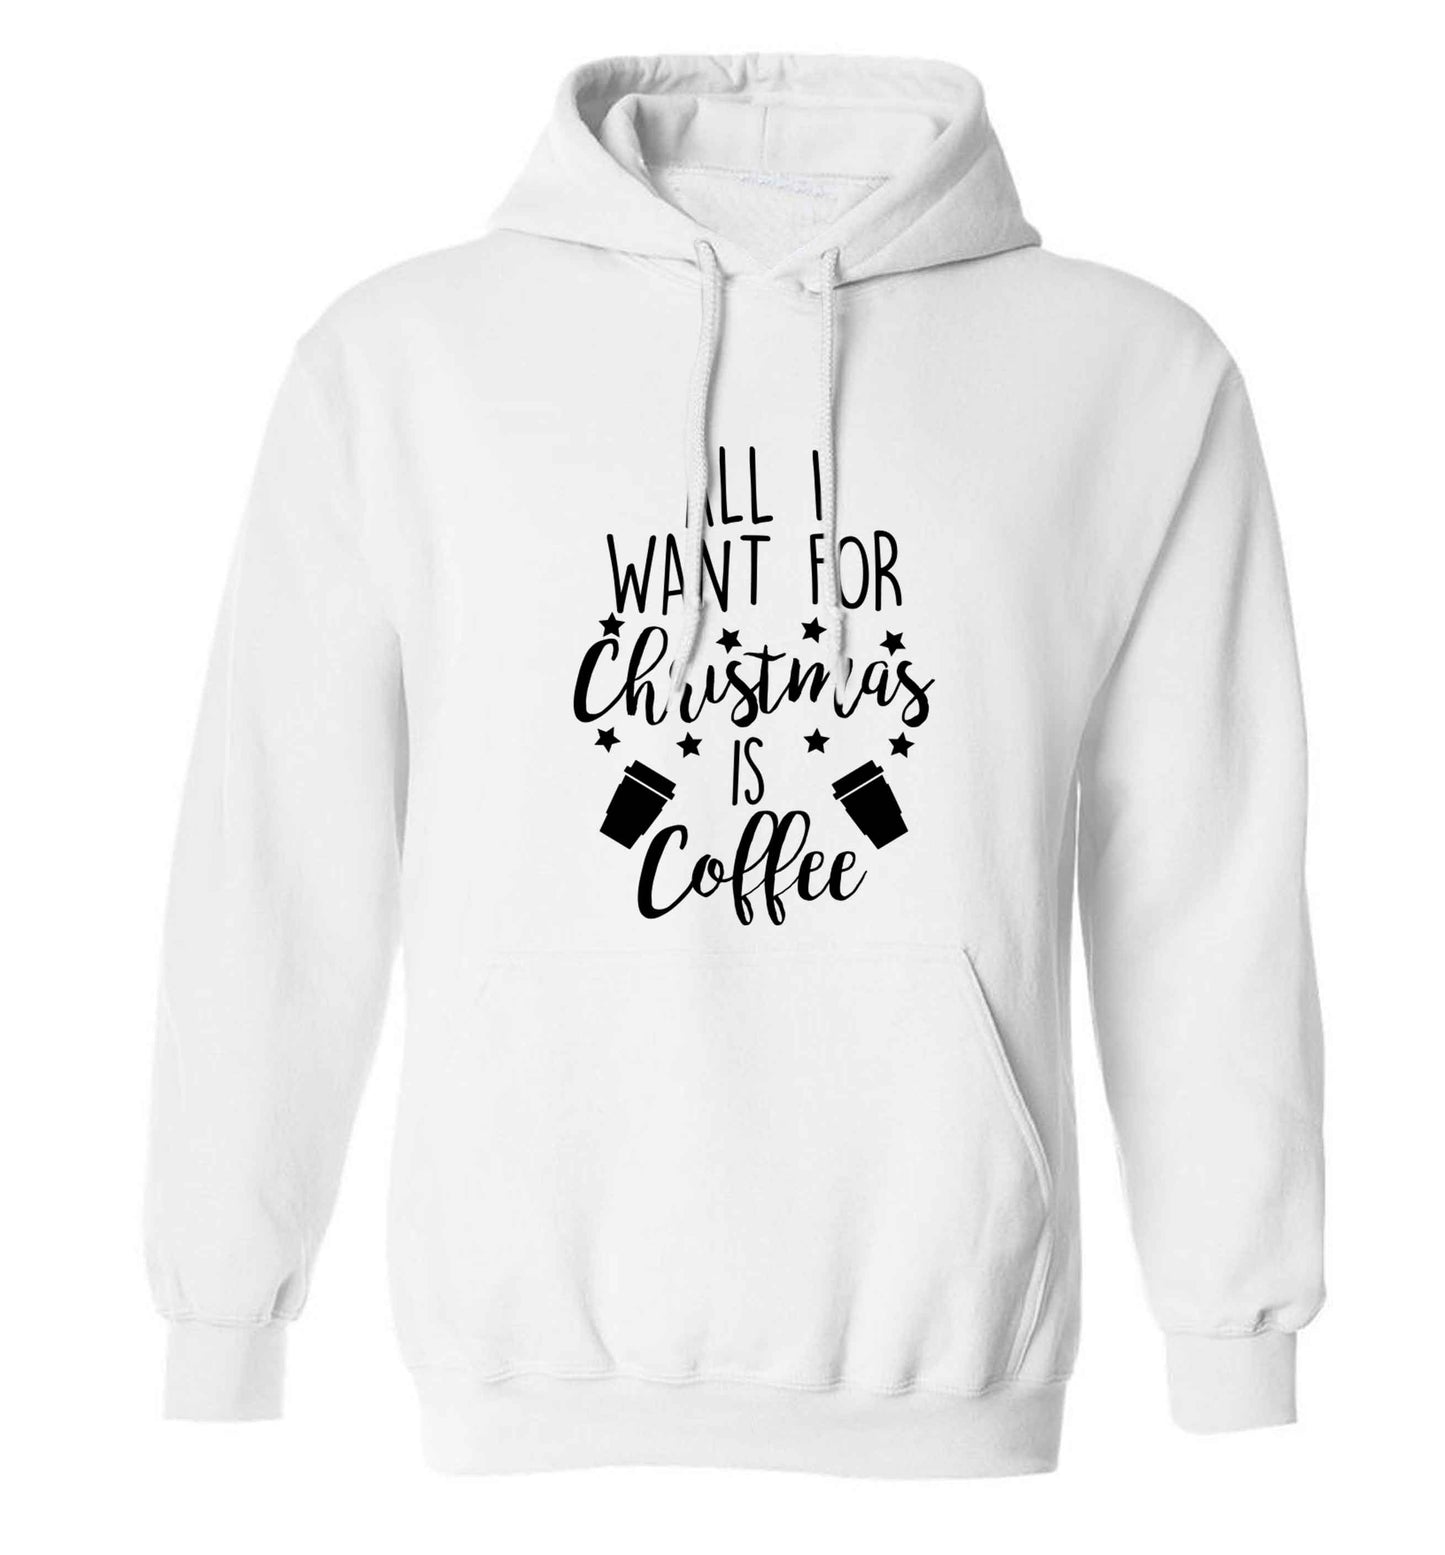 All I want for Christmas is coffee adults unisex white hoodie 2XL